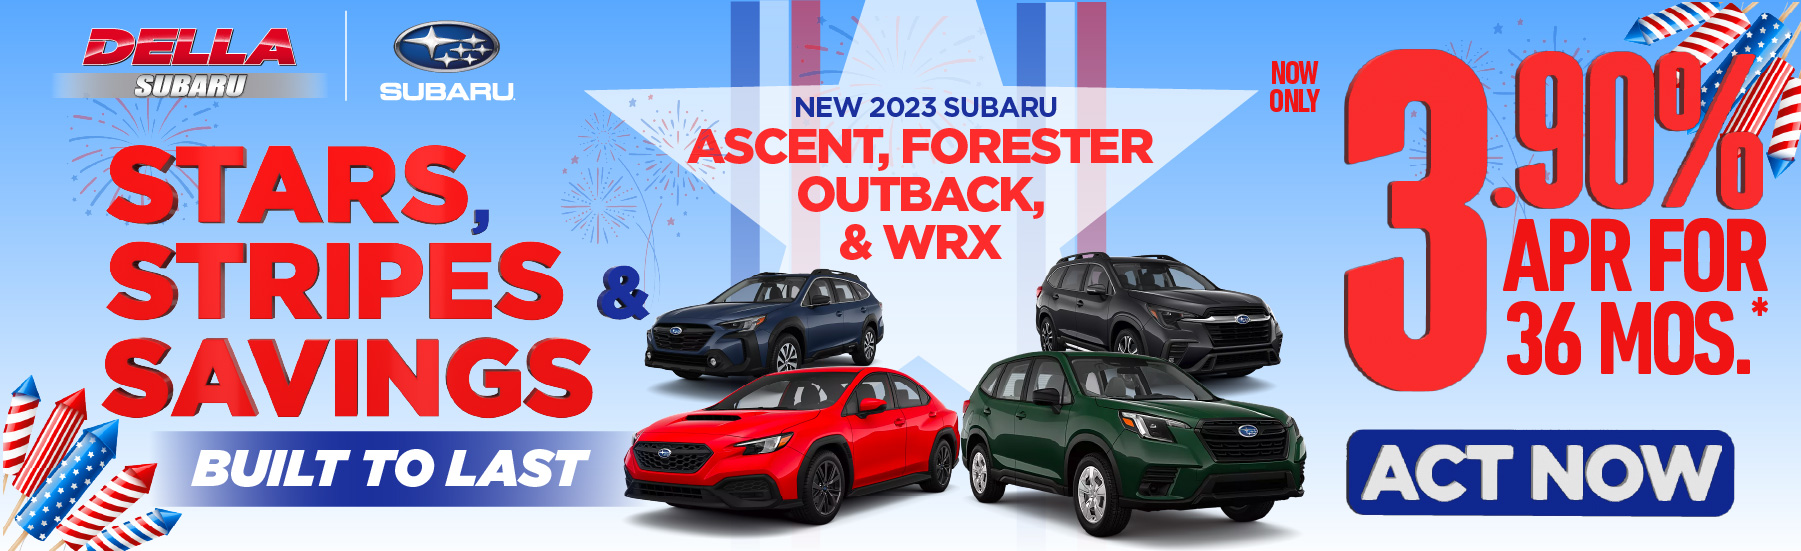 Get 1.9% APR available on select new Subaru models* - ACT NOW 